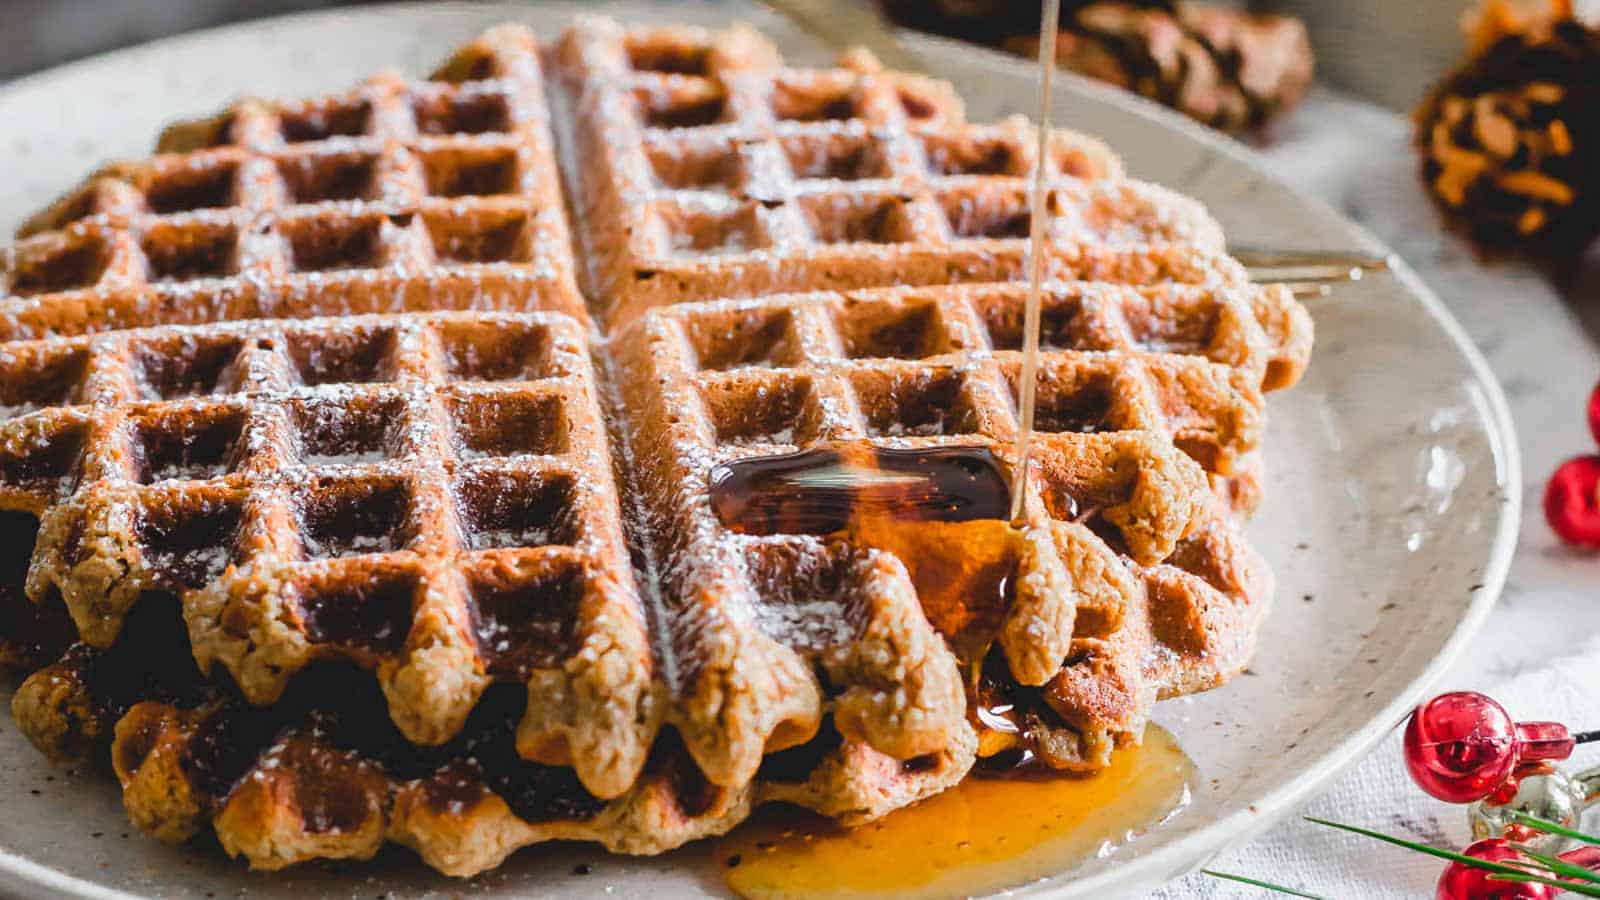 A plate of gingerbread waffles with syrup on it.